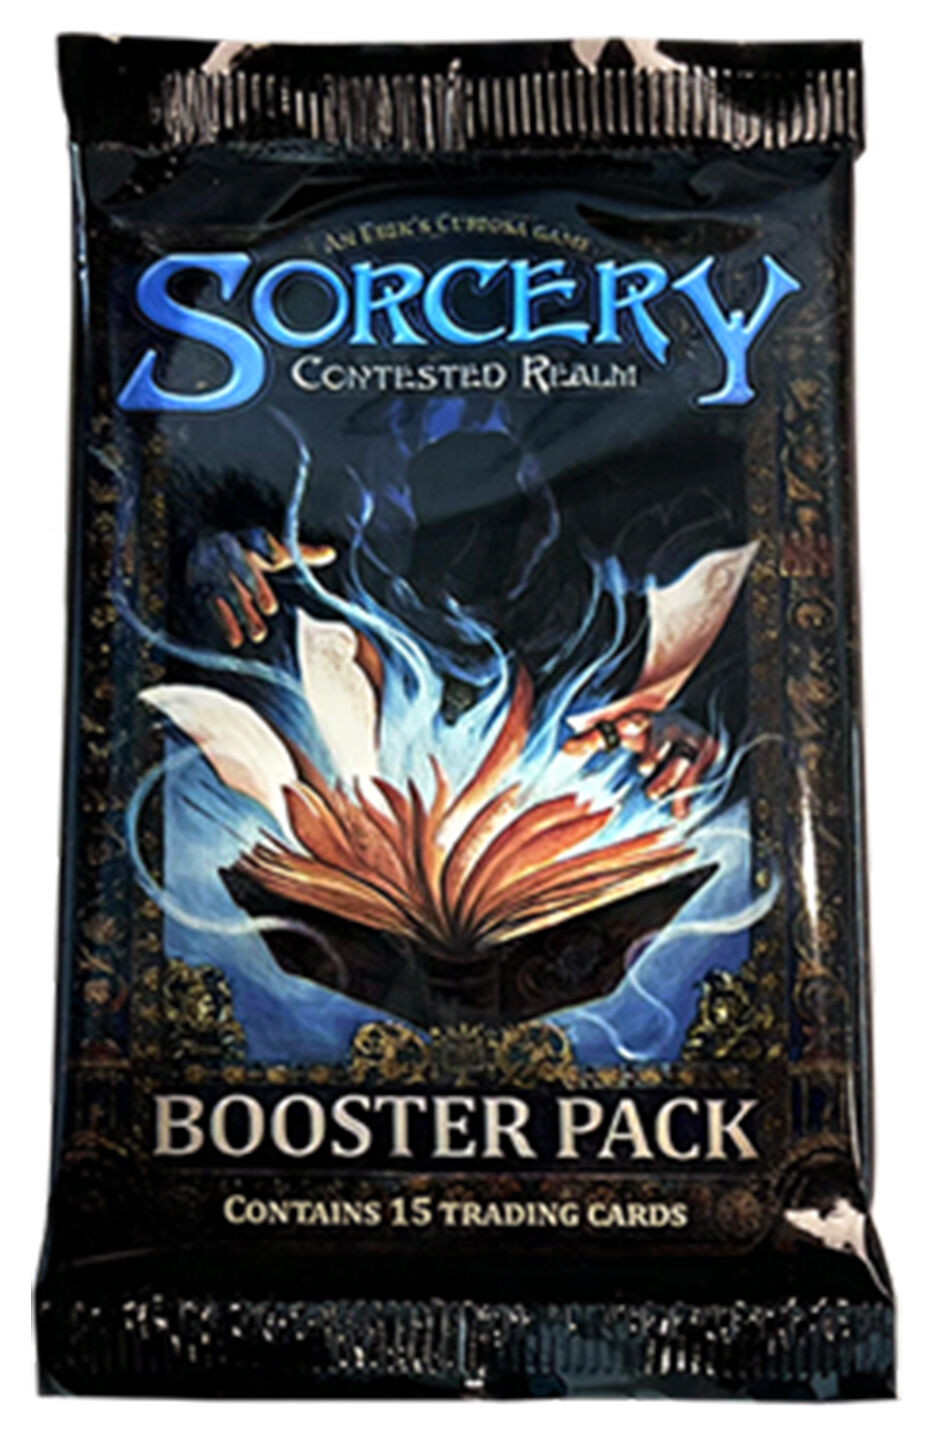 Contested Realm Booster Box - Sorcery TCG - EN